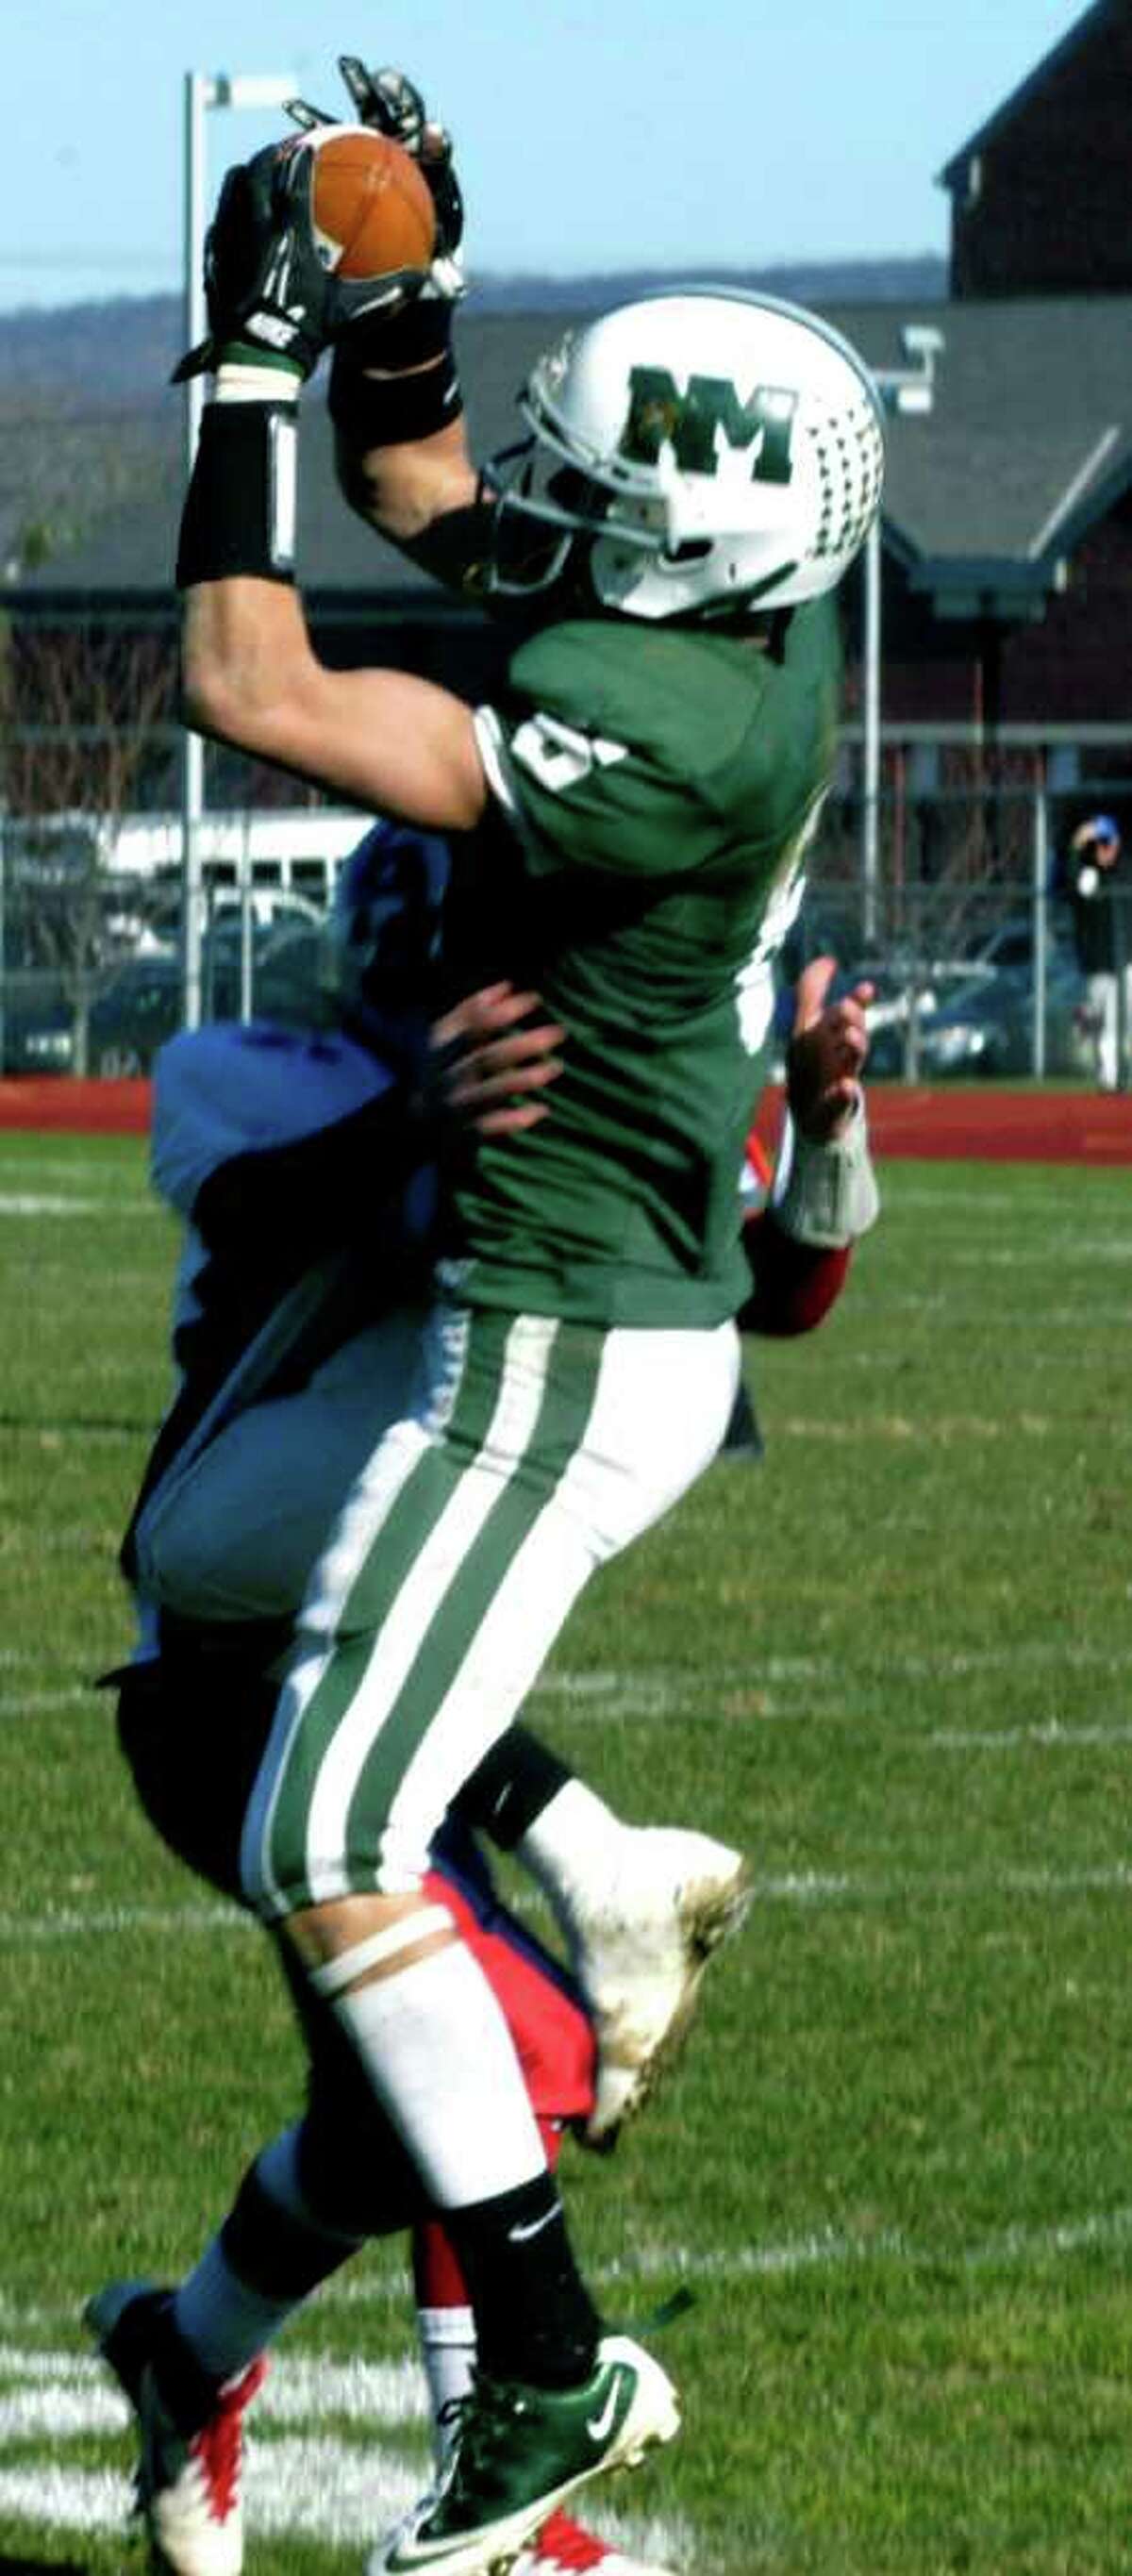 SPECTRUM/Kameron Bradshaw of the Green Wave clutches a deep pass from NMHS quarterback Conor Shanahan on Thanksgiving Day as the New Milford High School football team outlasts visiting New Fairfield, 31-28, to capture the Candlewood Cup. Nov. 24, 2011